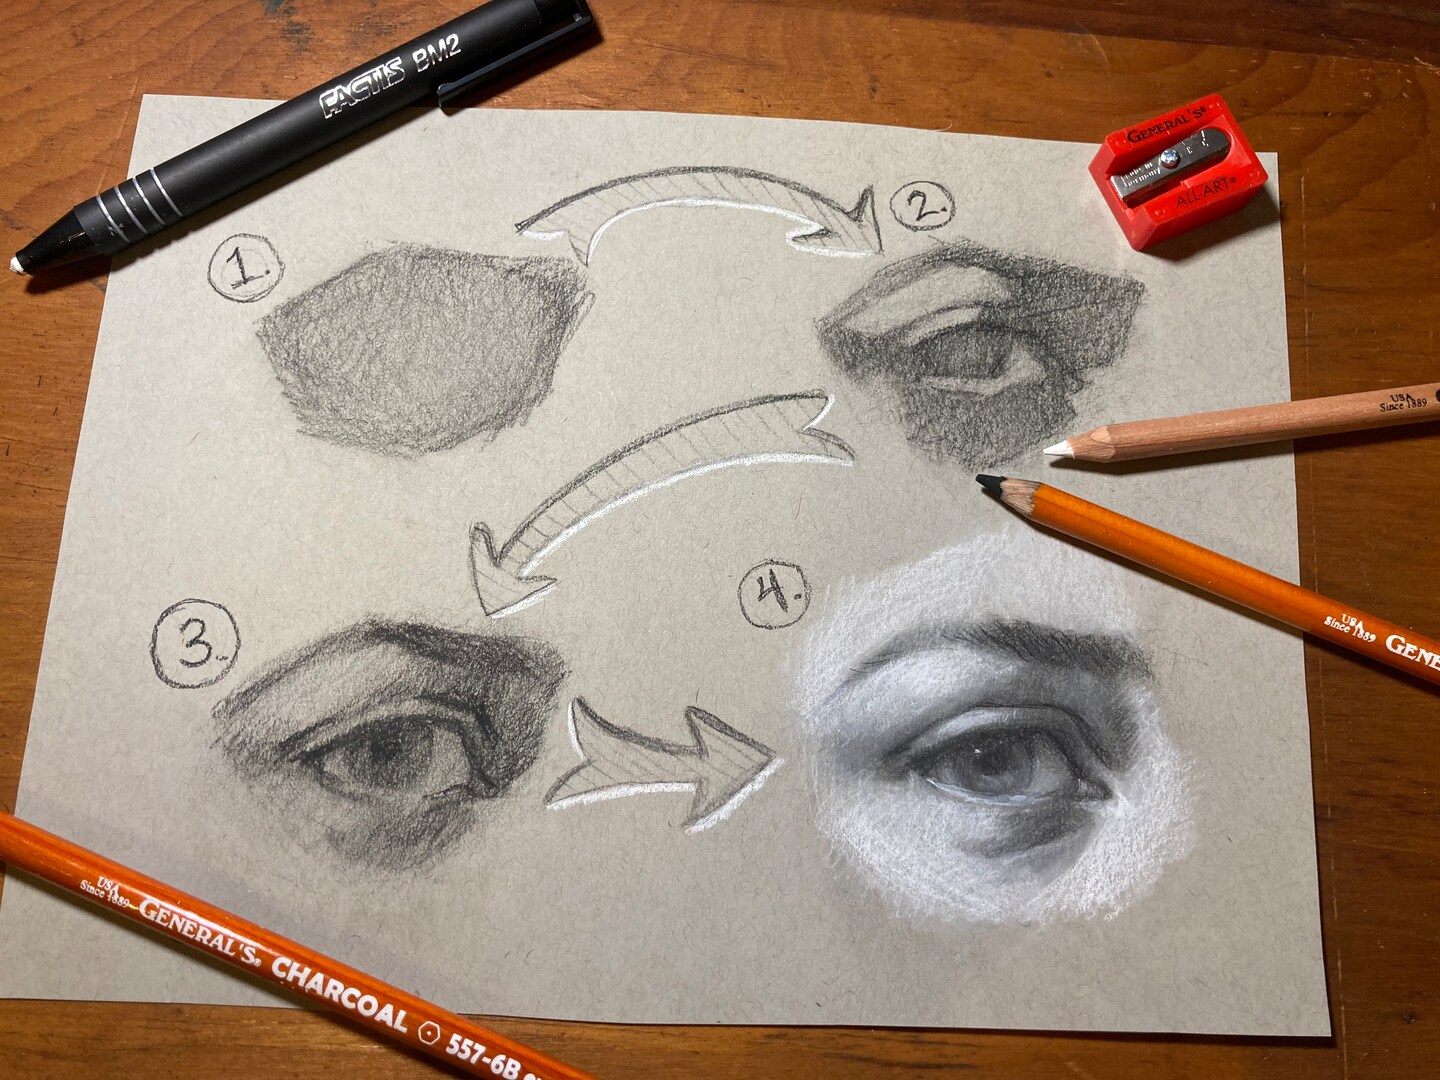 CLASS101+  “Pencil drawing techniques that make drawing easier” by The  Picture verified by 2,500 people